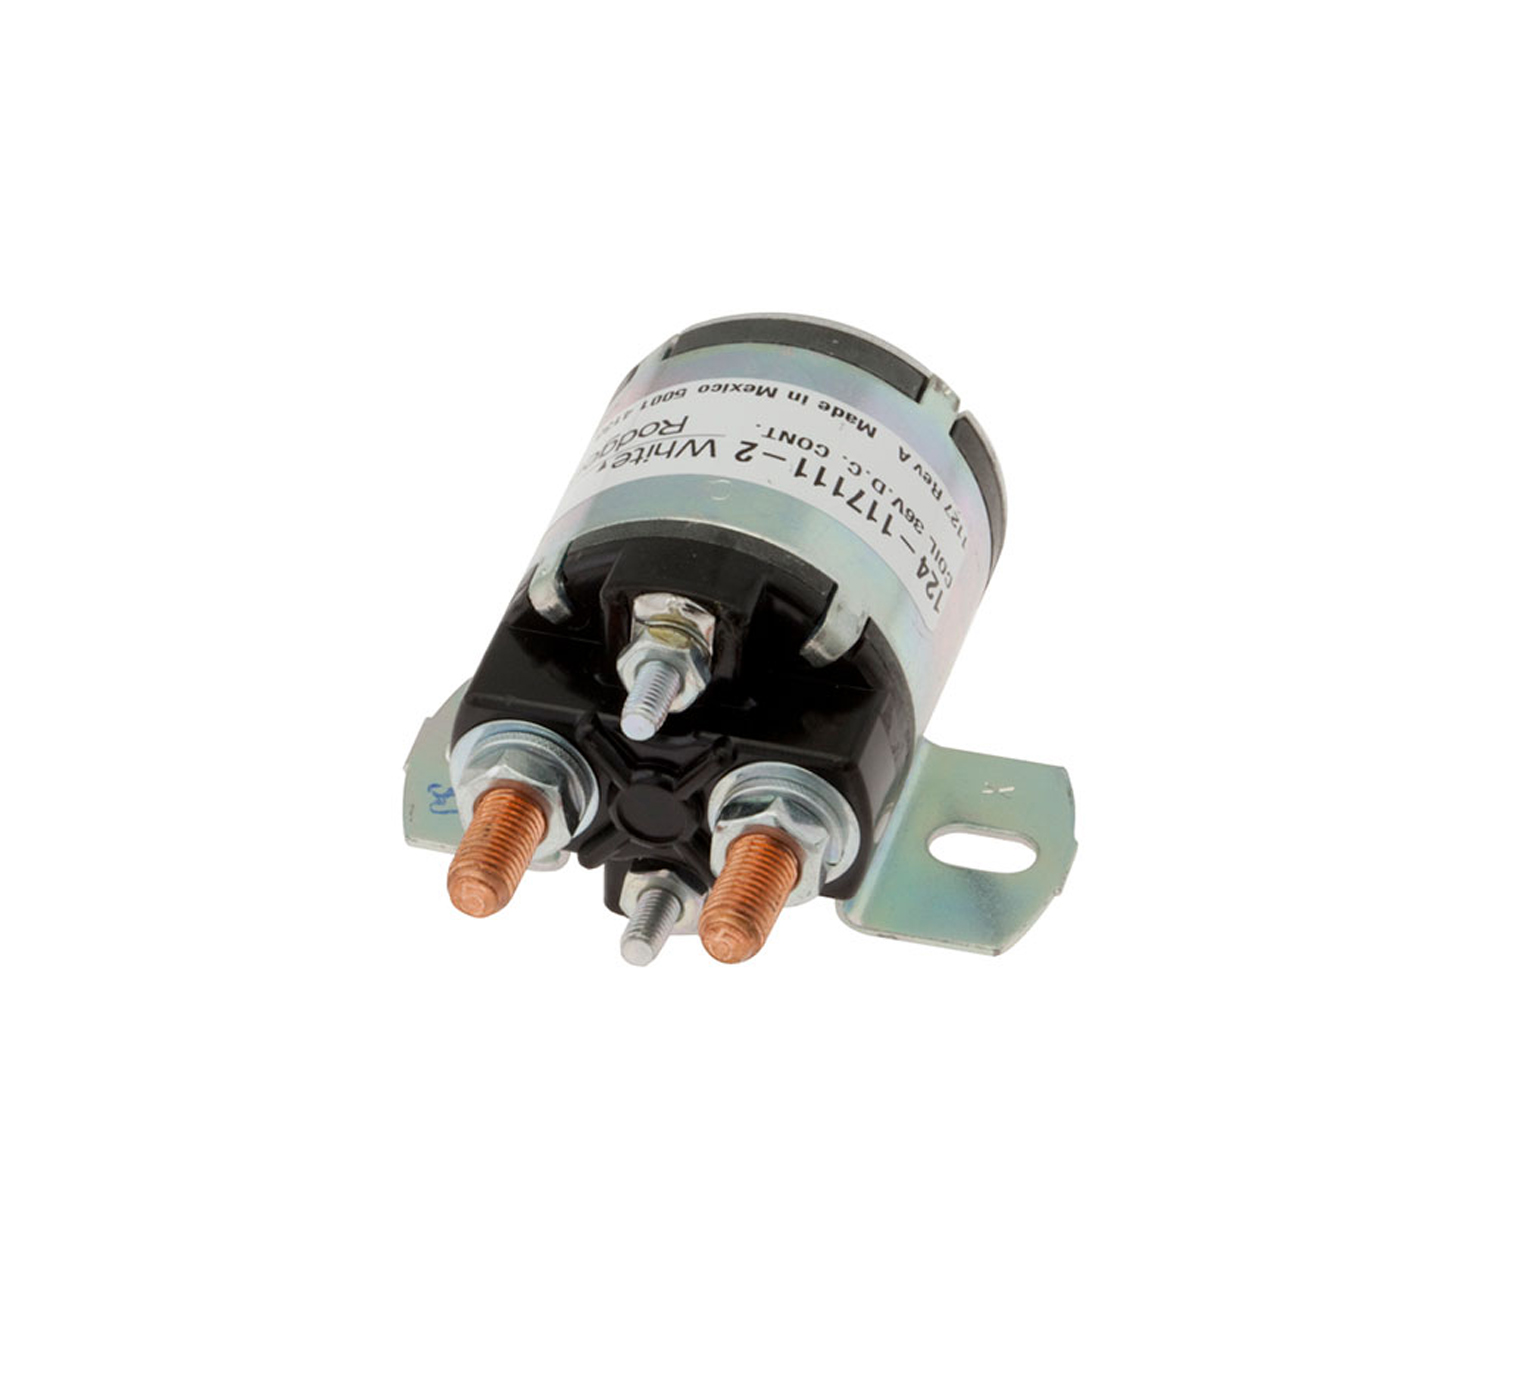 Tennant 1038490 Relay 24vdc 100a No Trombetta for sale online 